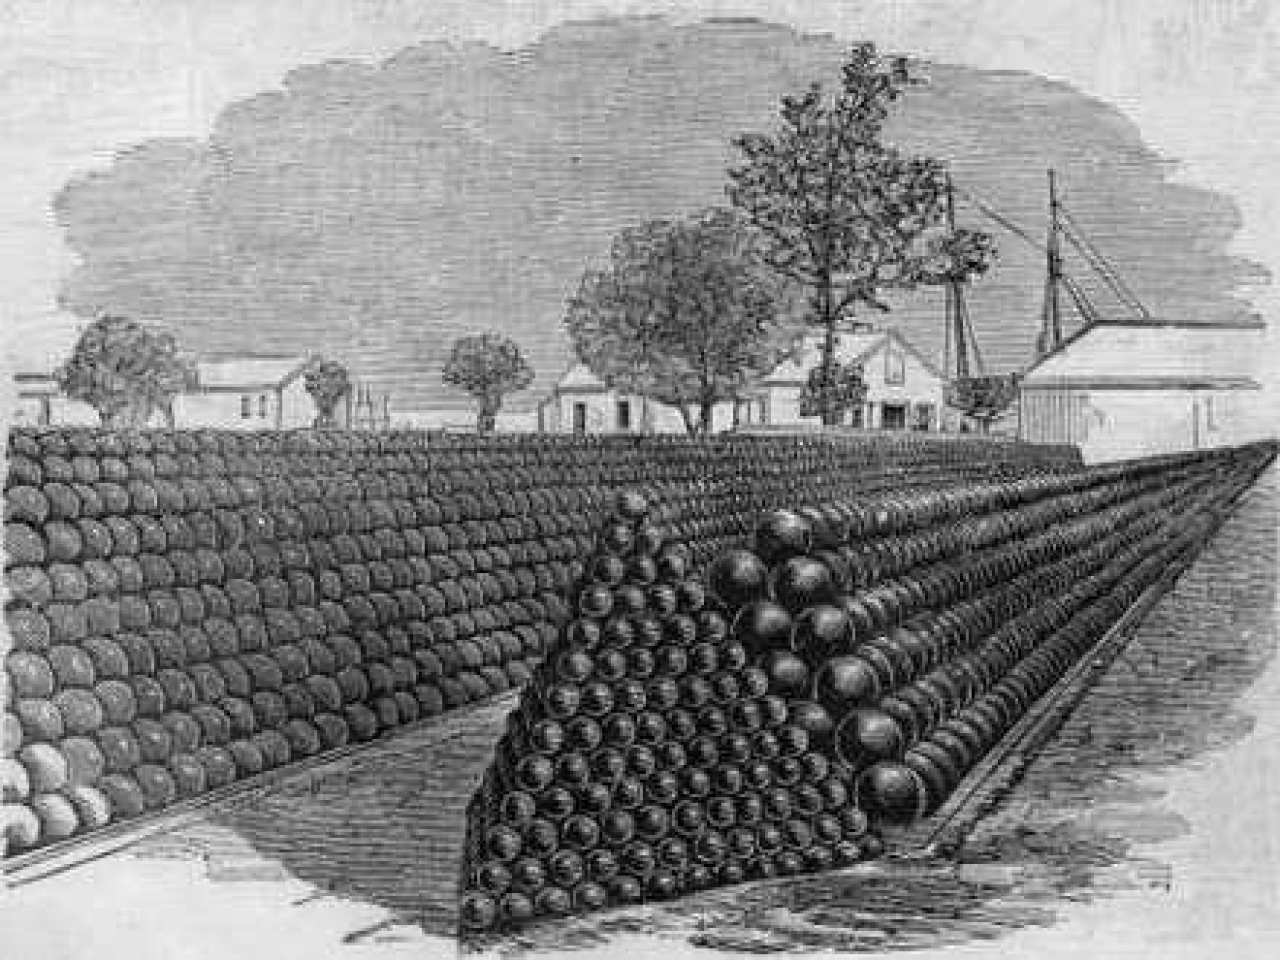 Cannonballs stacked in densely packed rows